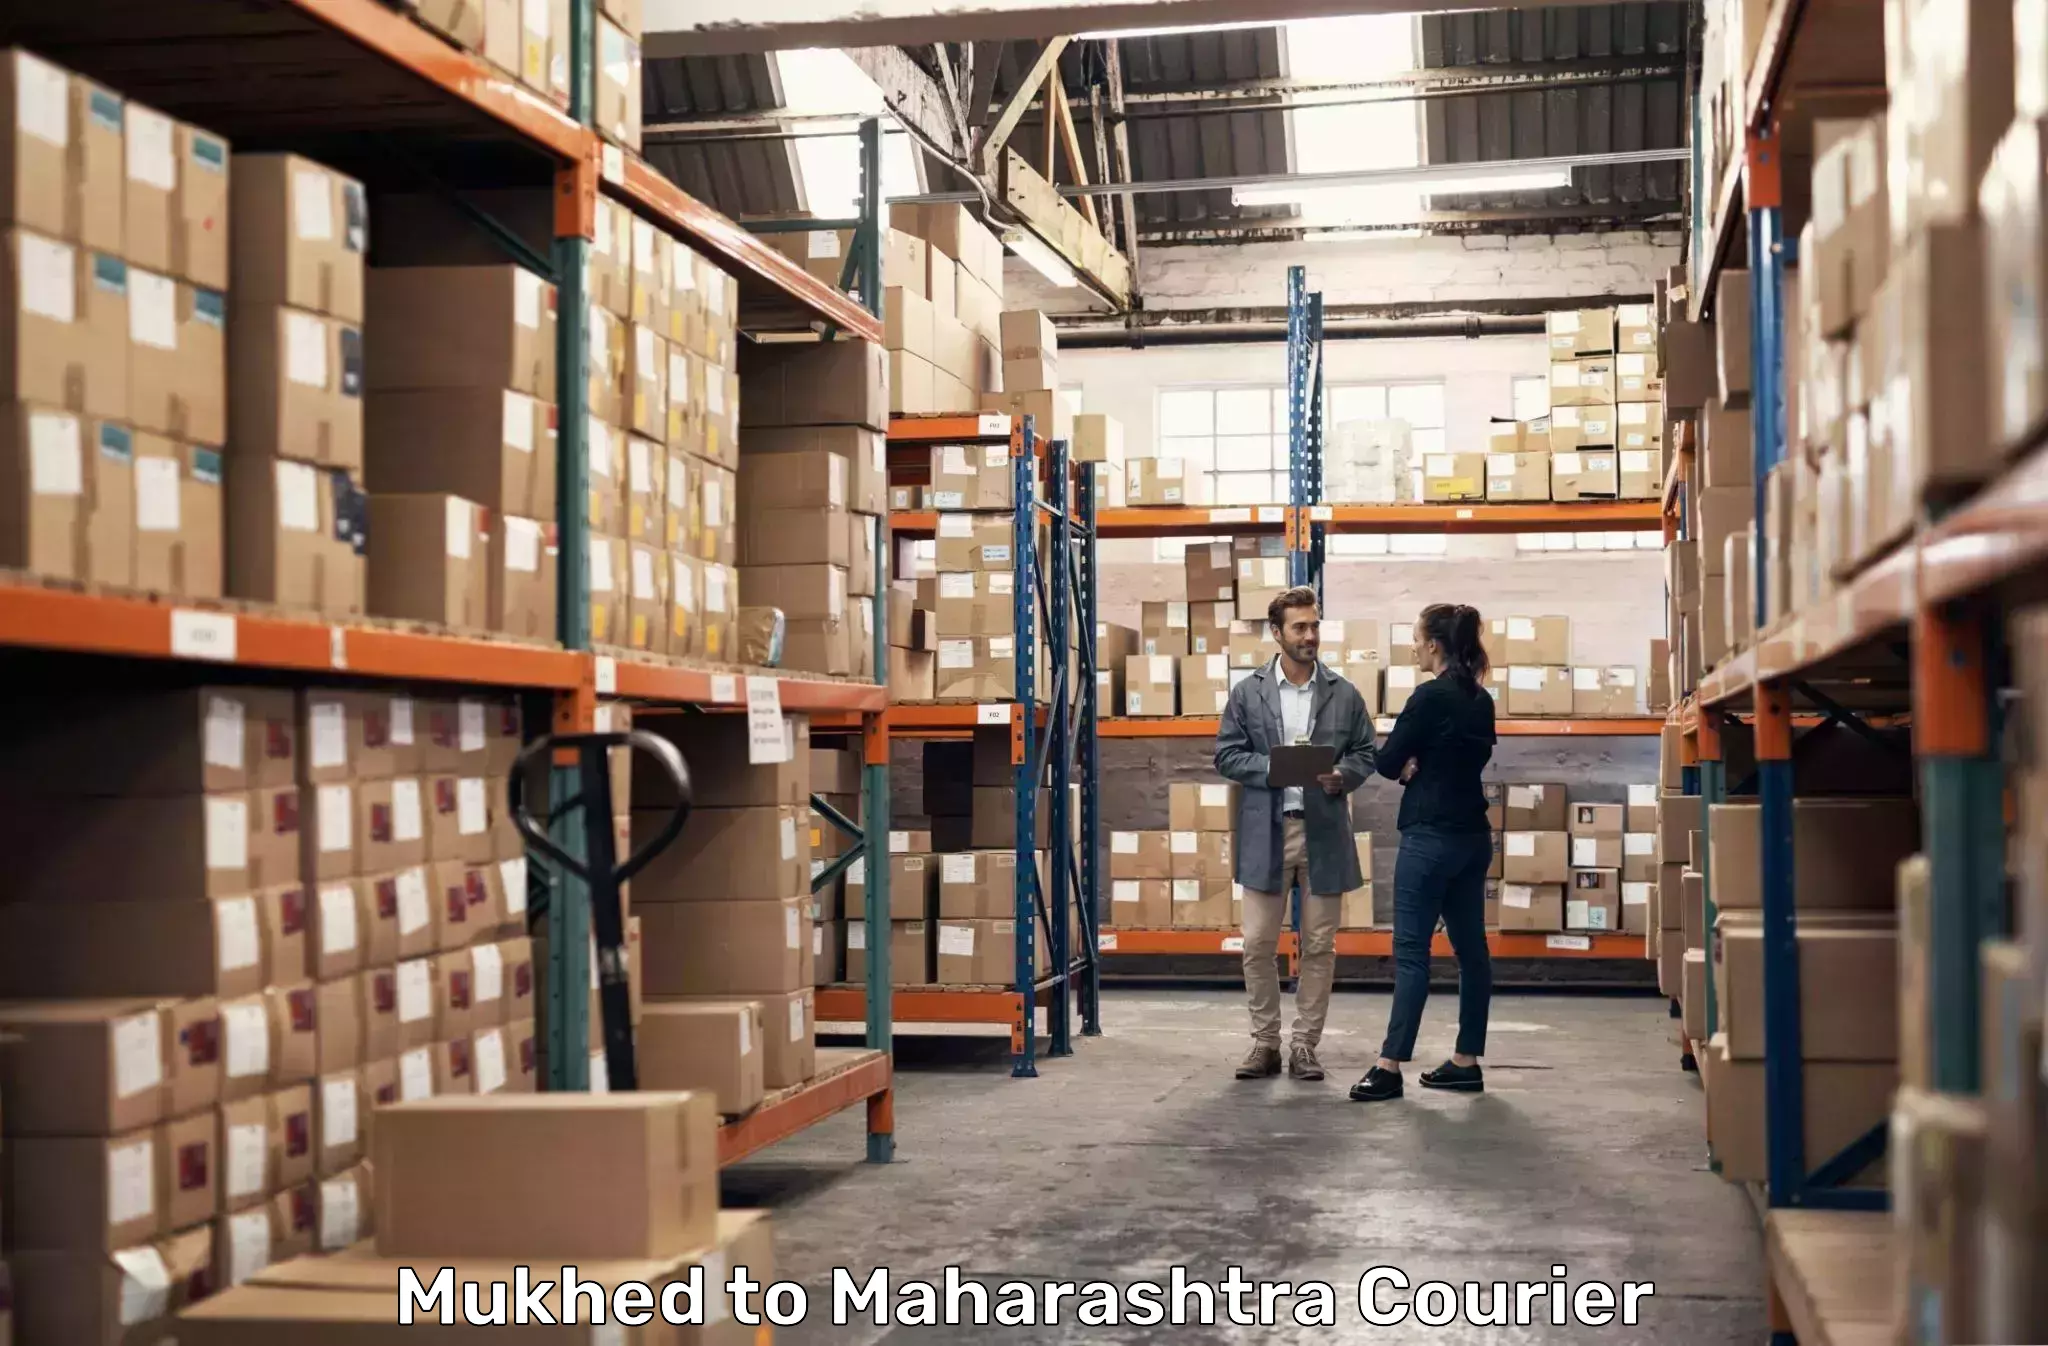 Global freight services Mukhed to Talere